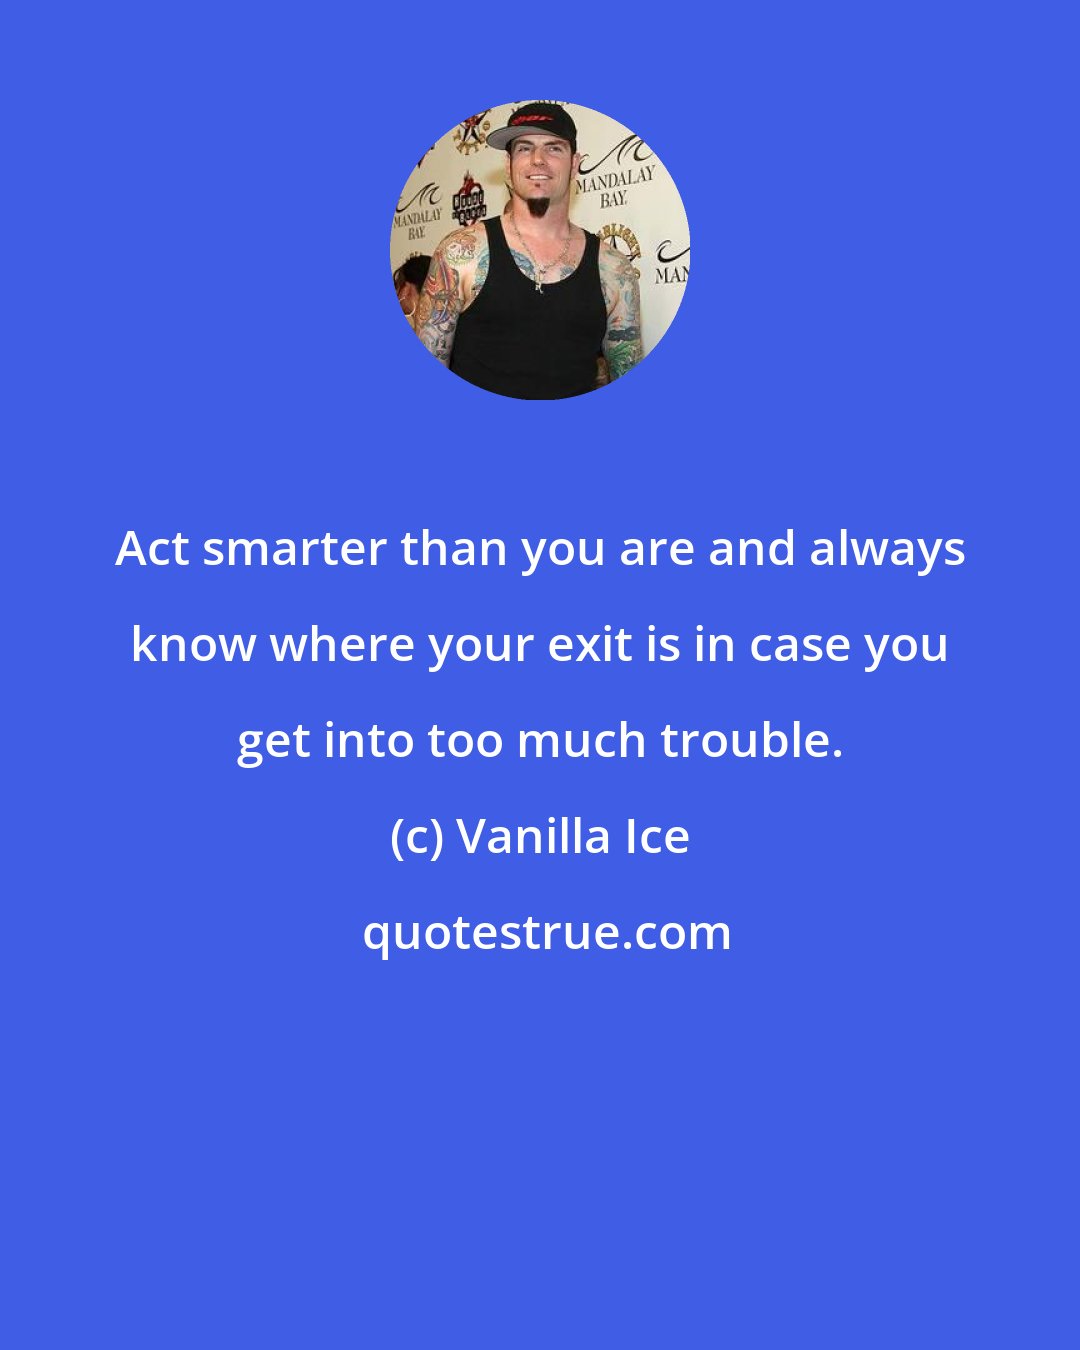 Vanilla Ice: Act smarter than you are and always know where your exit is in case you get into too much trouble.